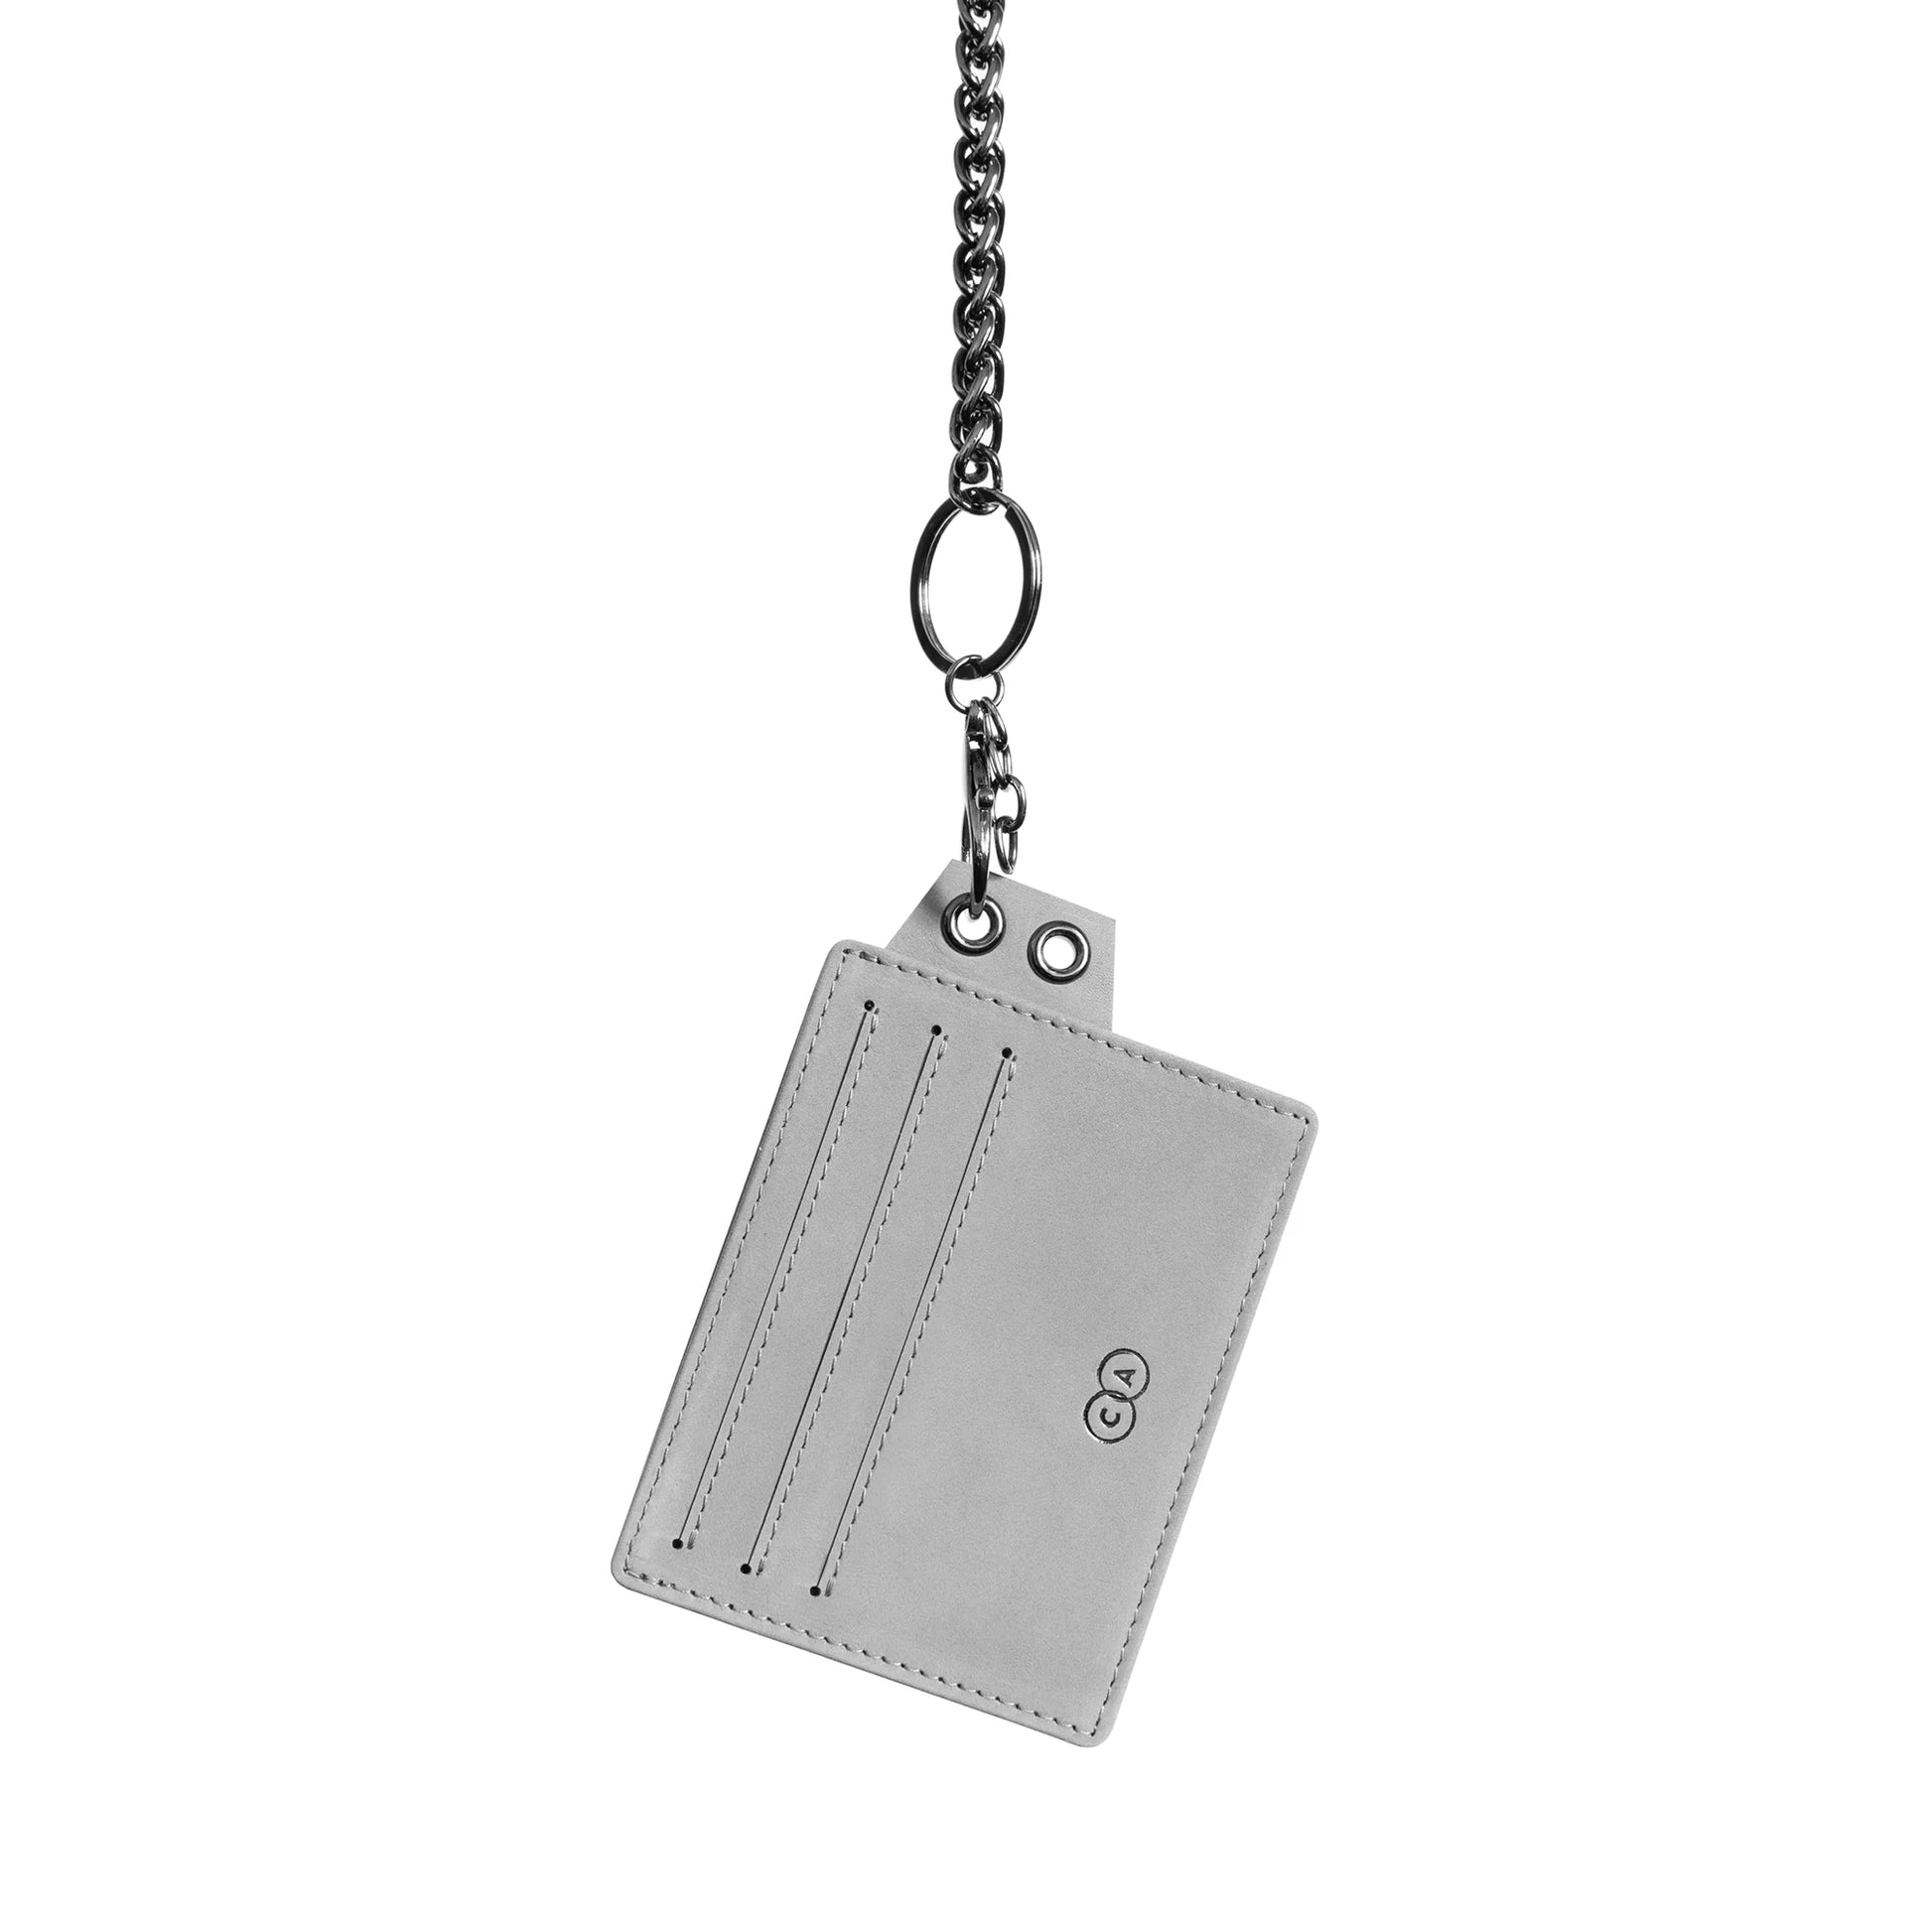 Suede card holder hanging from chain